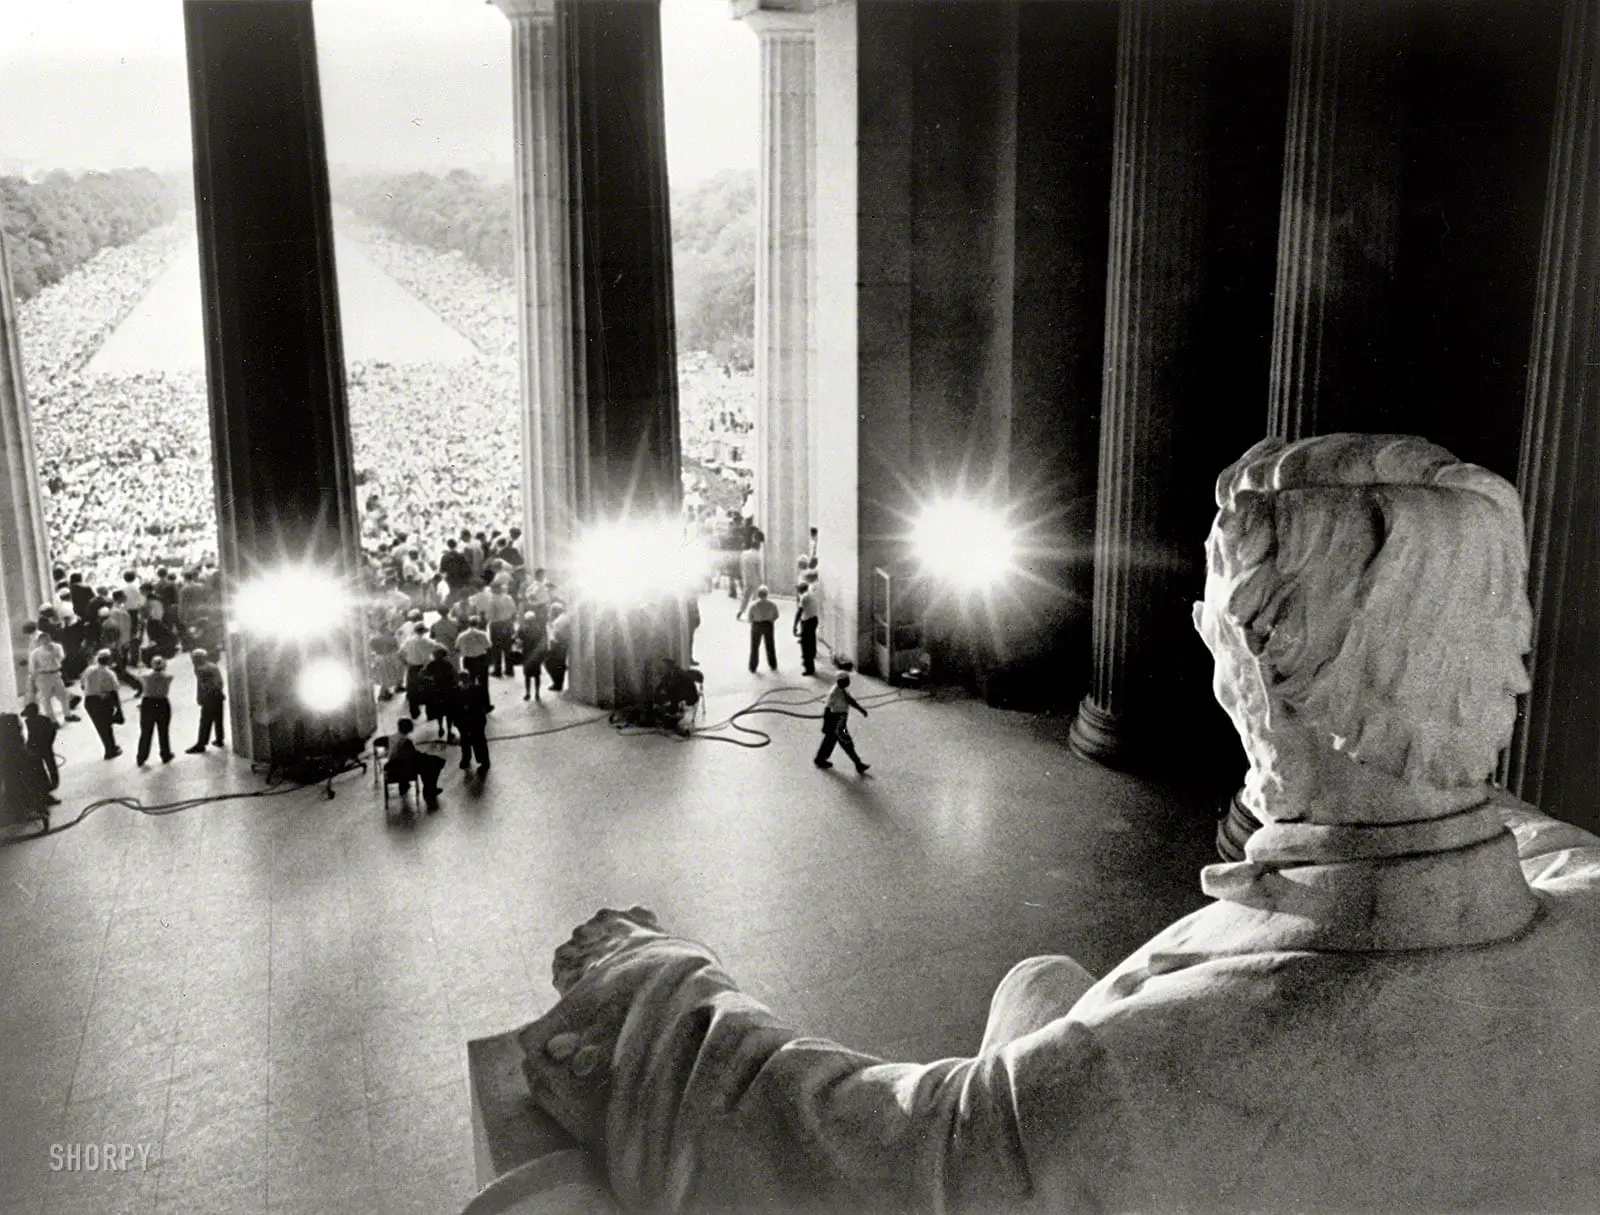 August 28, 1963. "Emancipator looking down on demonstrators. Participants in the March on Washington in front of the Lincoln Memorial and massed along both sides of the Reflecting Pool, viewed from behind Abraham Lincoln statue." Photo by James K. Atherton for United Press International.